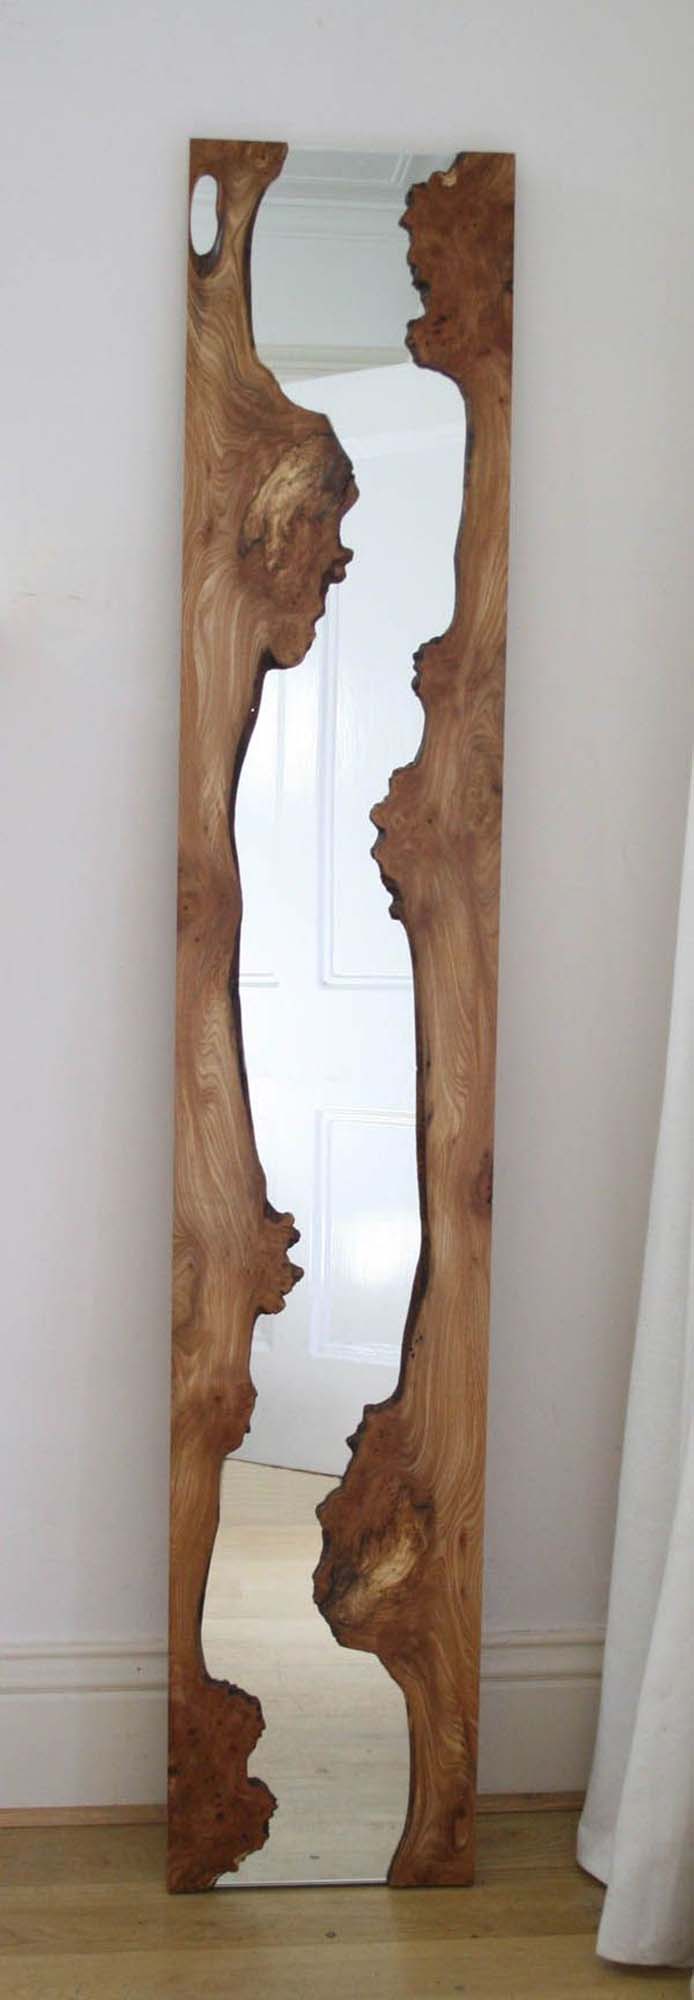 A Mirror Enclosed By A Trunk Slice